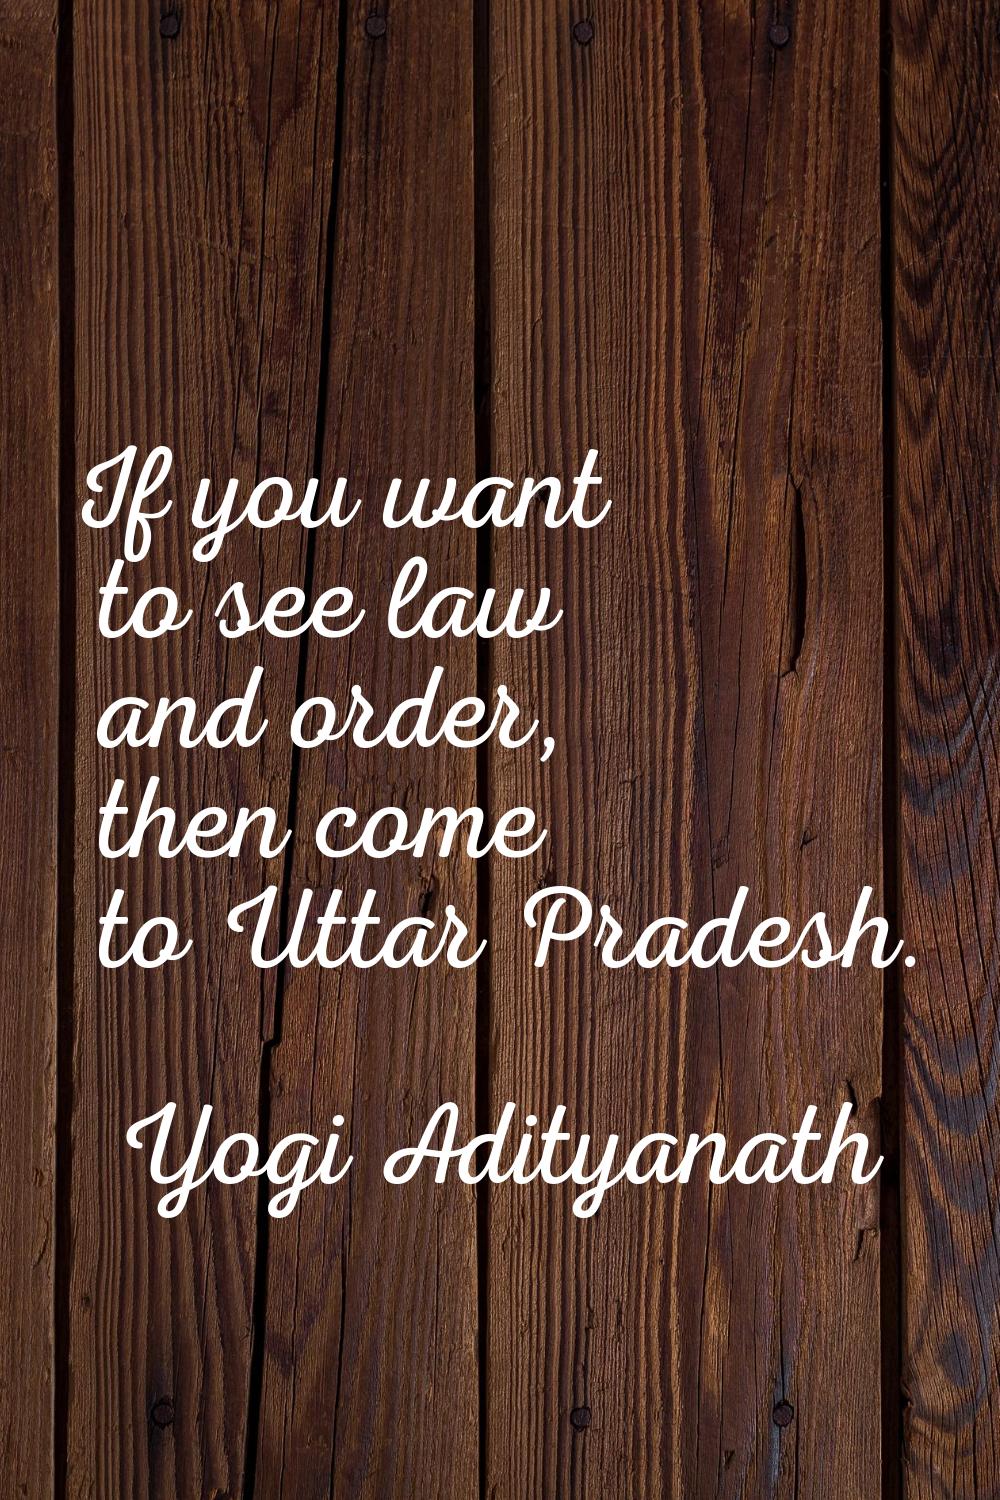 If you want to see law and order, then come to Uttar Pradesh.